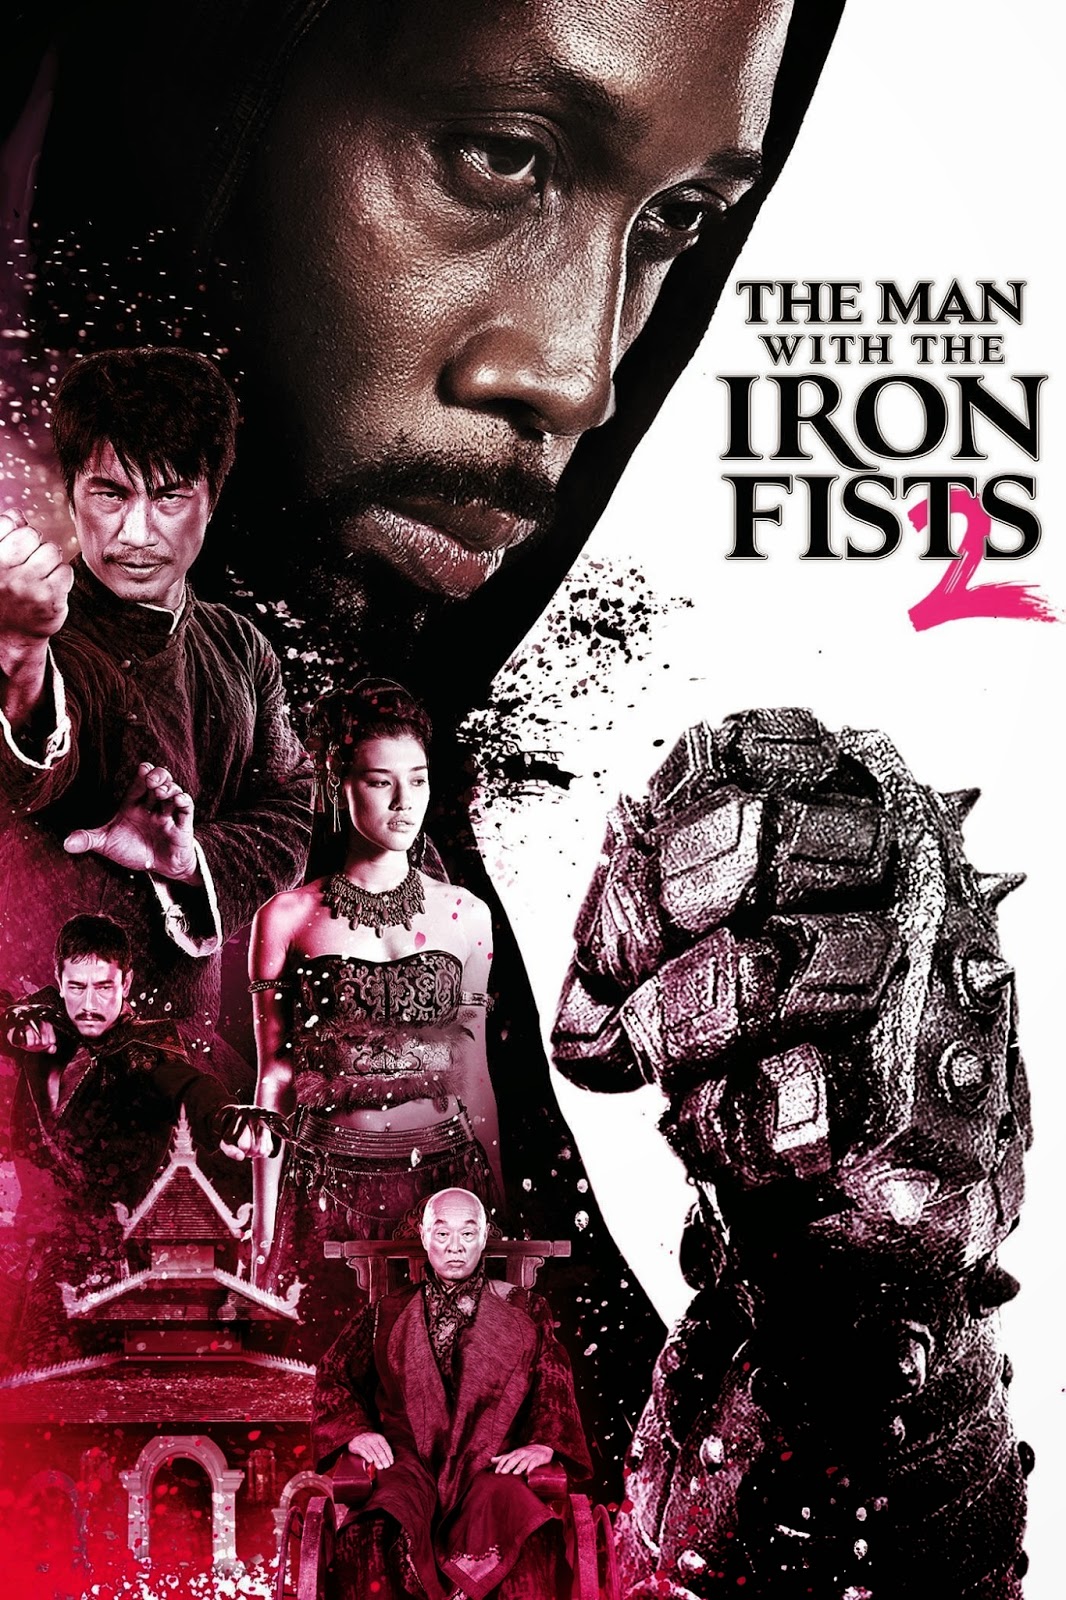 The Man with the Iron Fists 2 2015 - Full (HD)